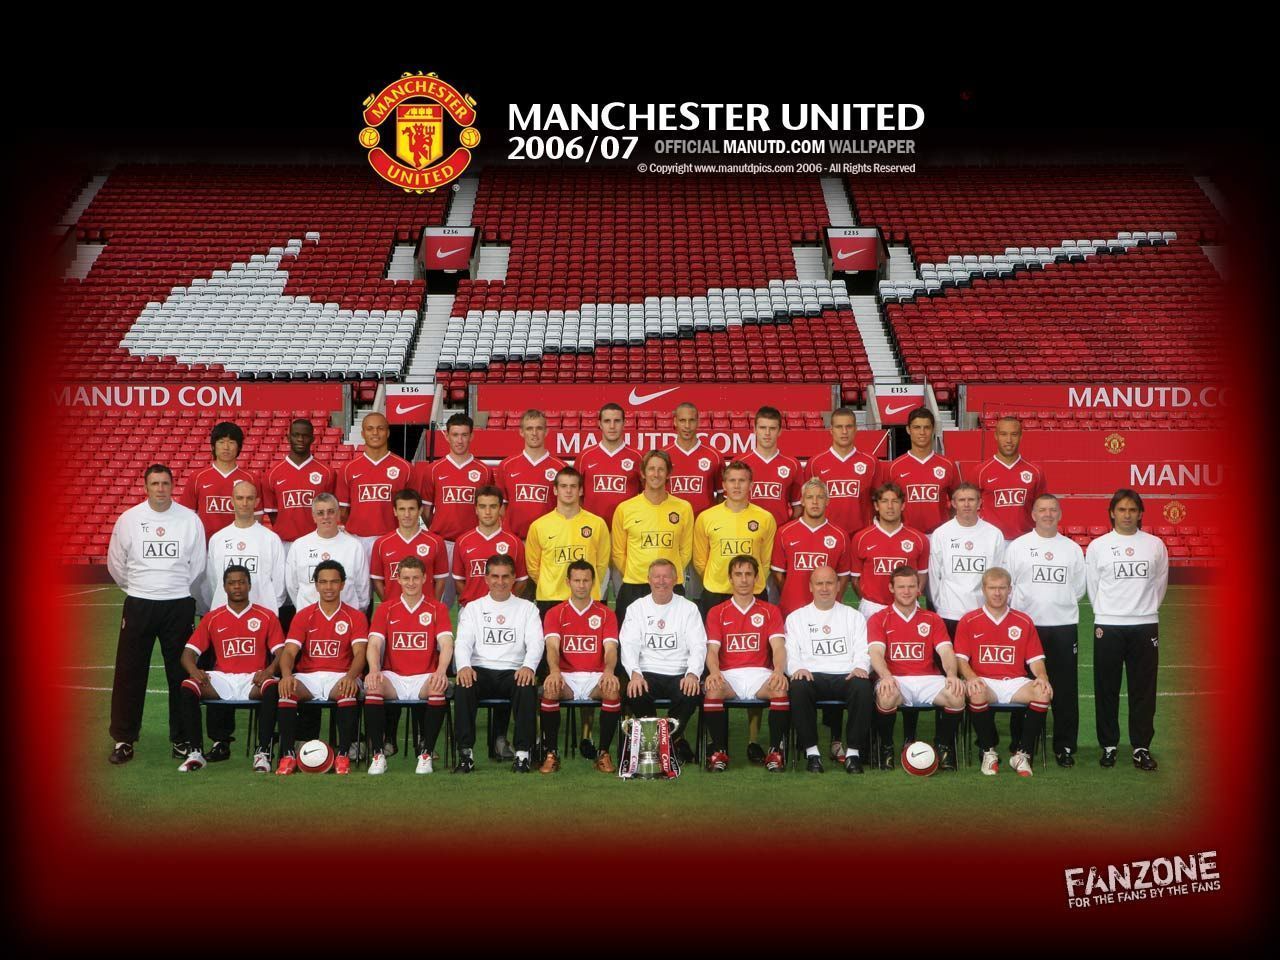 Manchester United Wallpaper #6 | Football Wallpapers and Videos